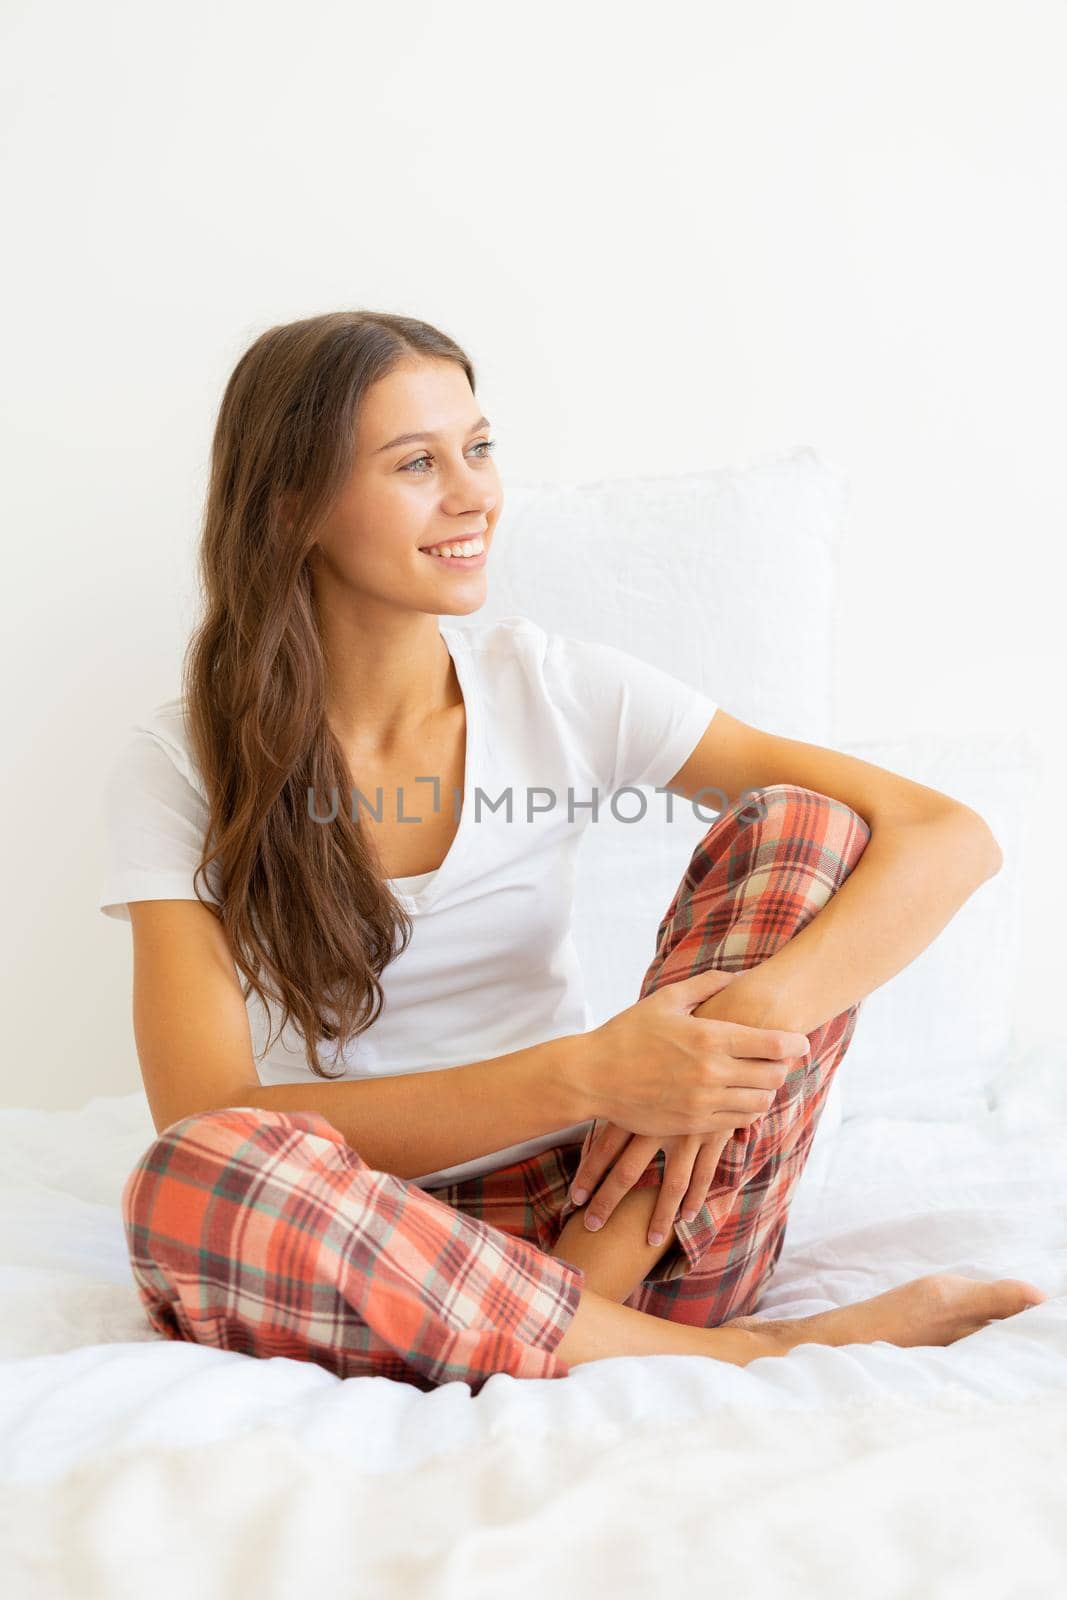 Beautiful young woman without makeup sitting on bed and looking away after waking up. Smiling young female meeting new day in good mood, positive attitude